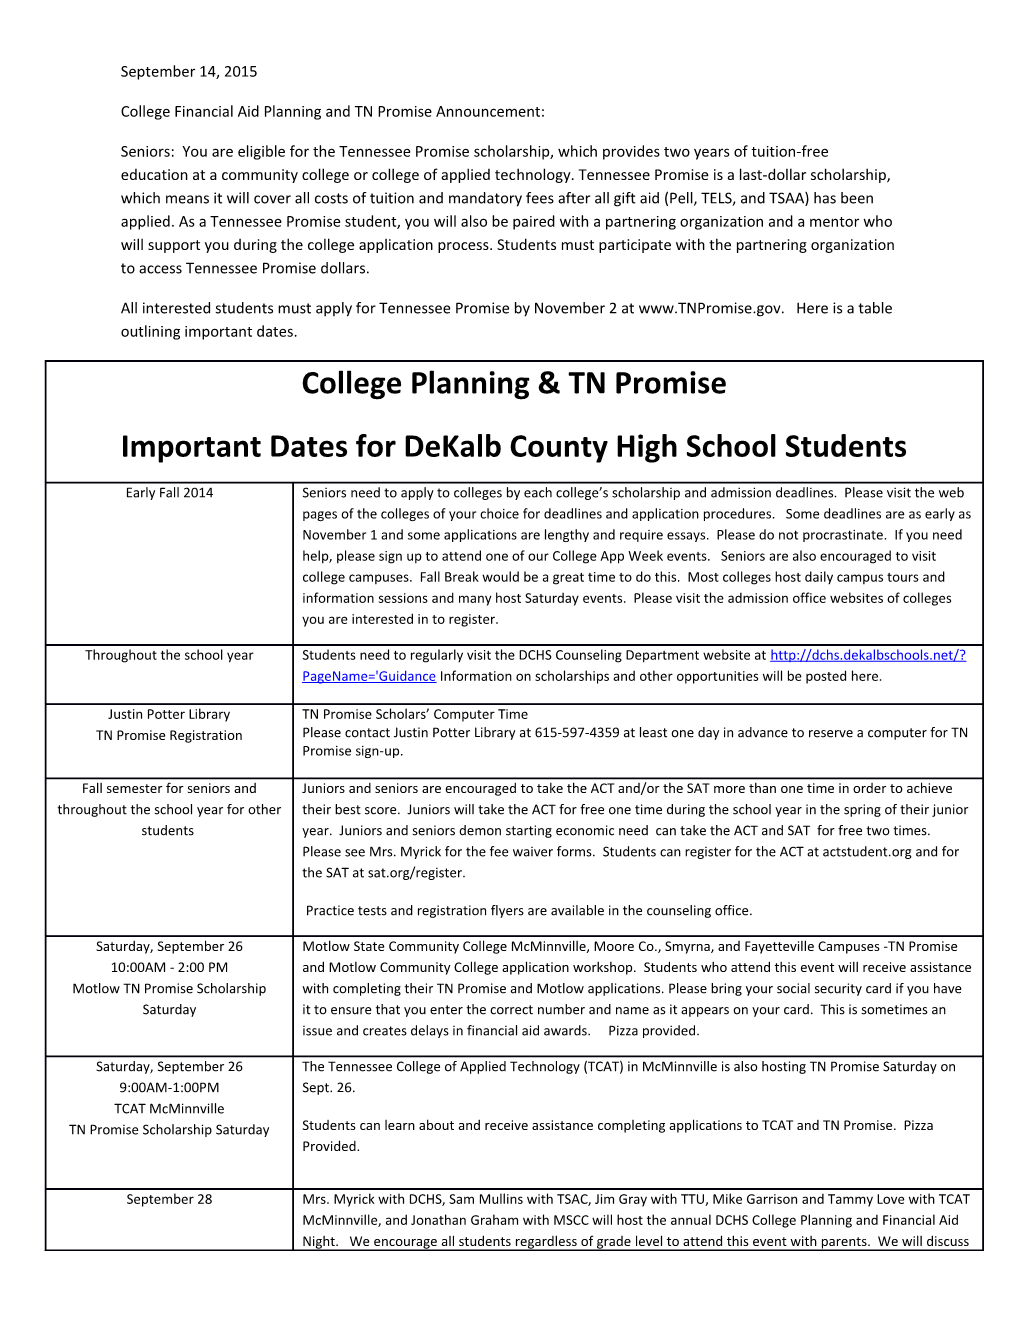 College Financial Aid Planning and TN Promise Announcement